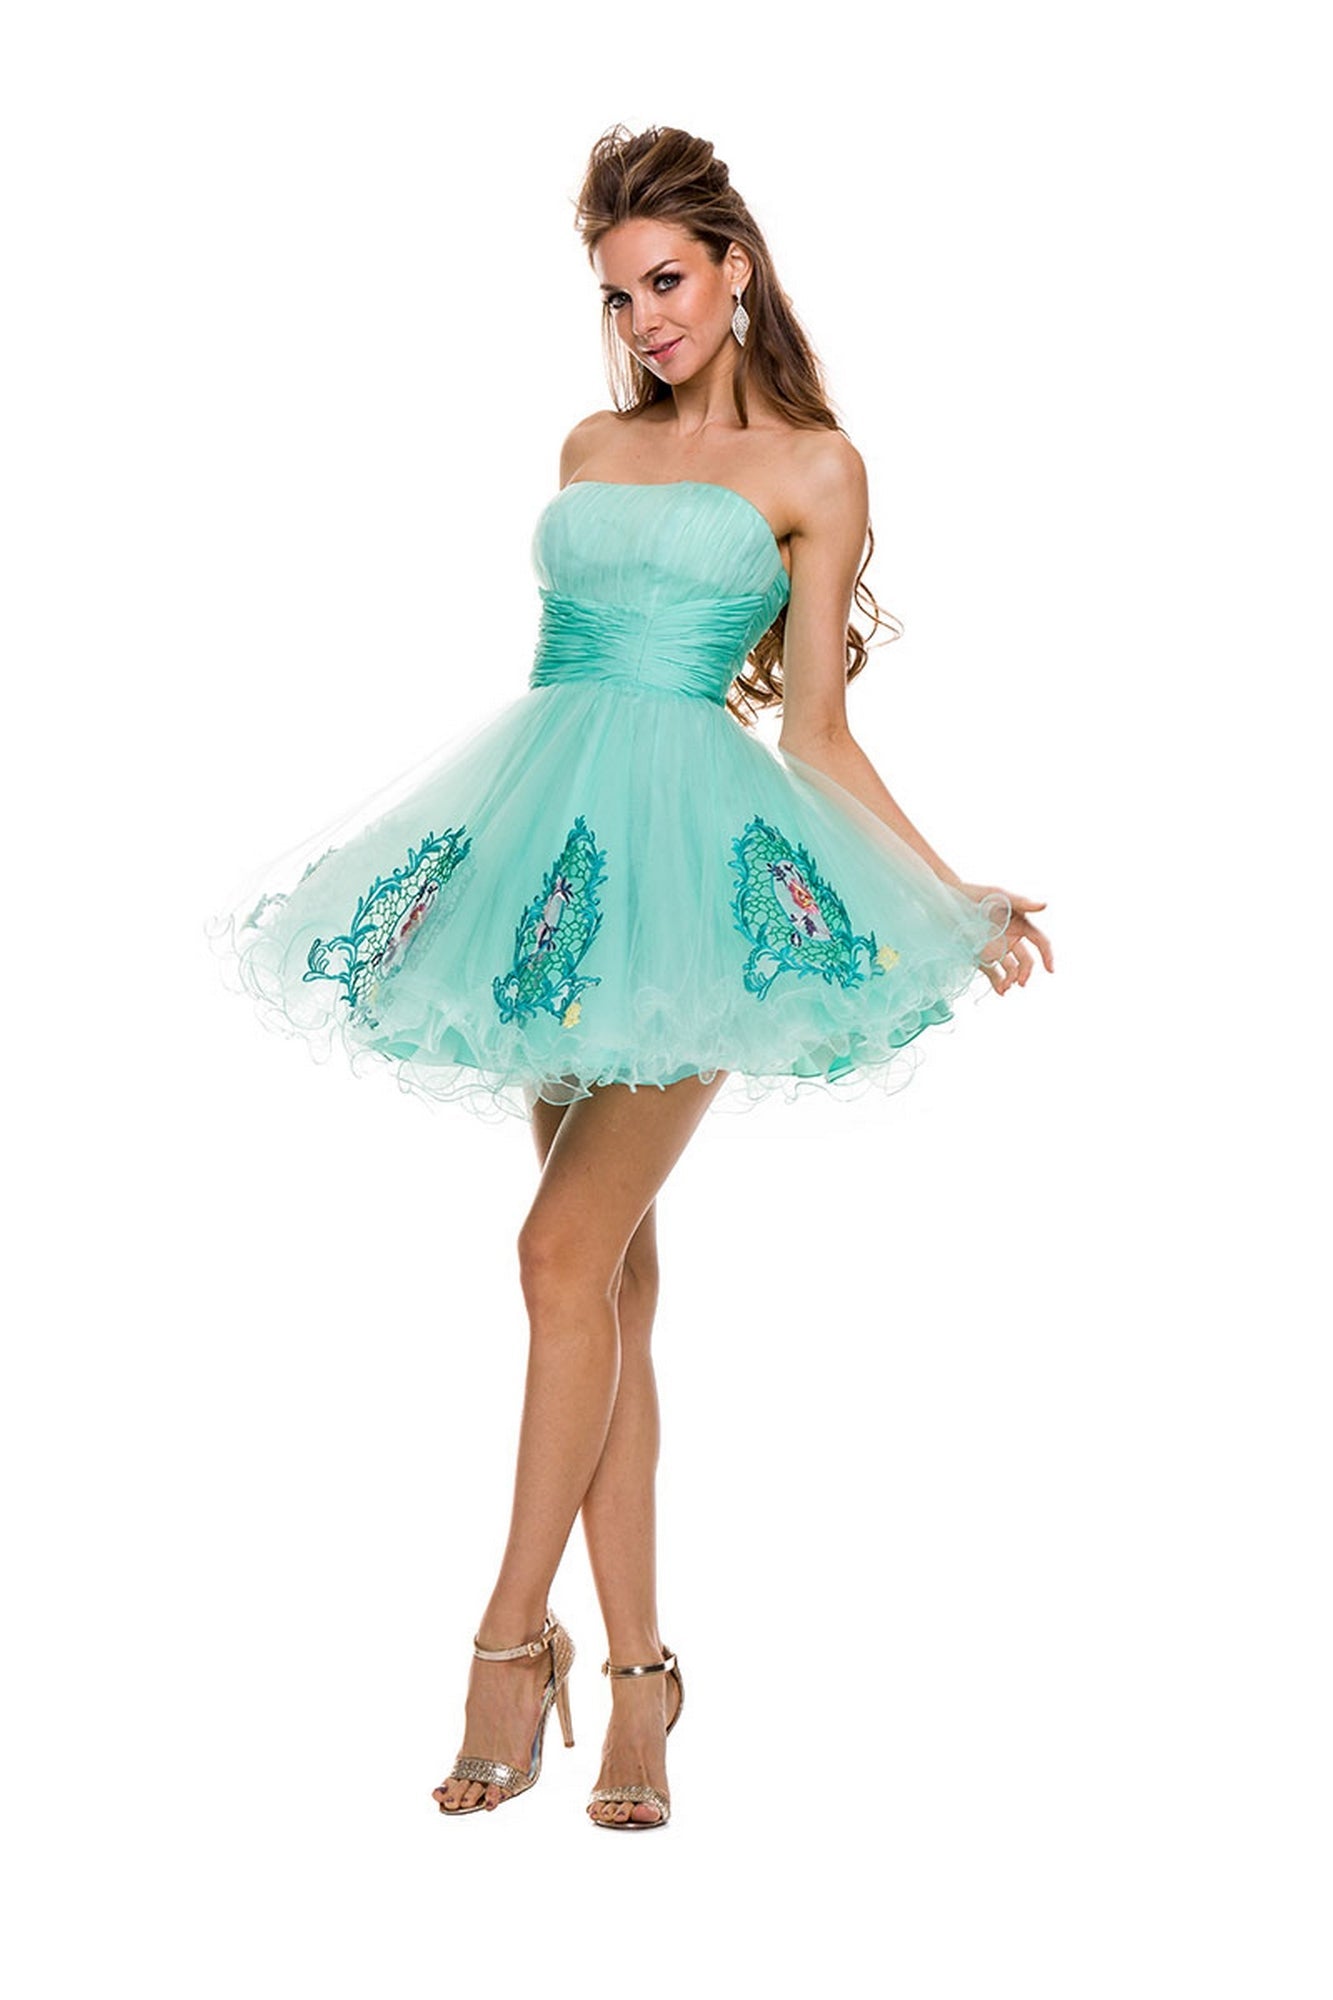  Short Homecoming Dress With Details On The Skirt